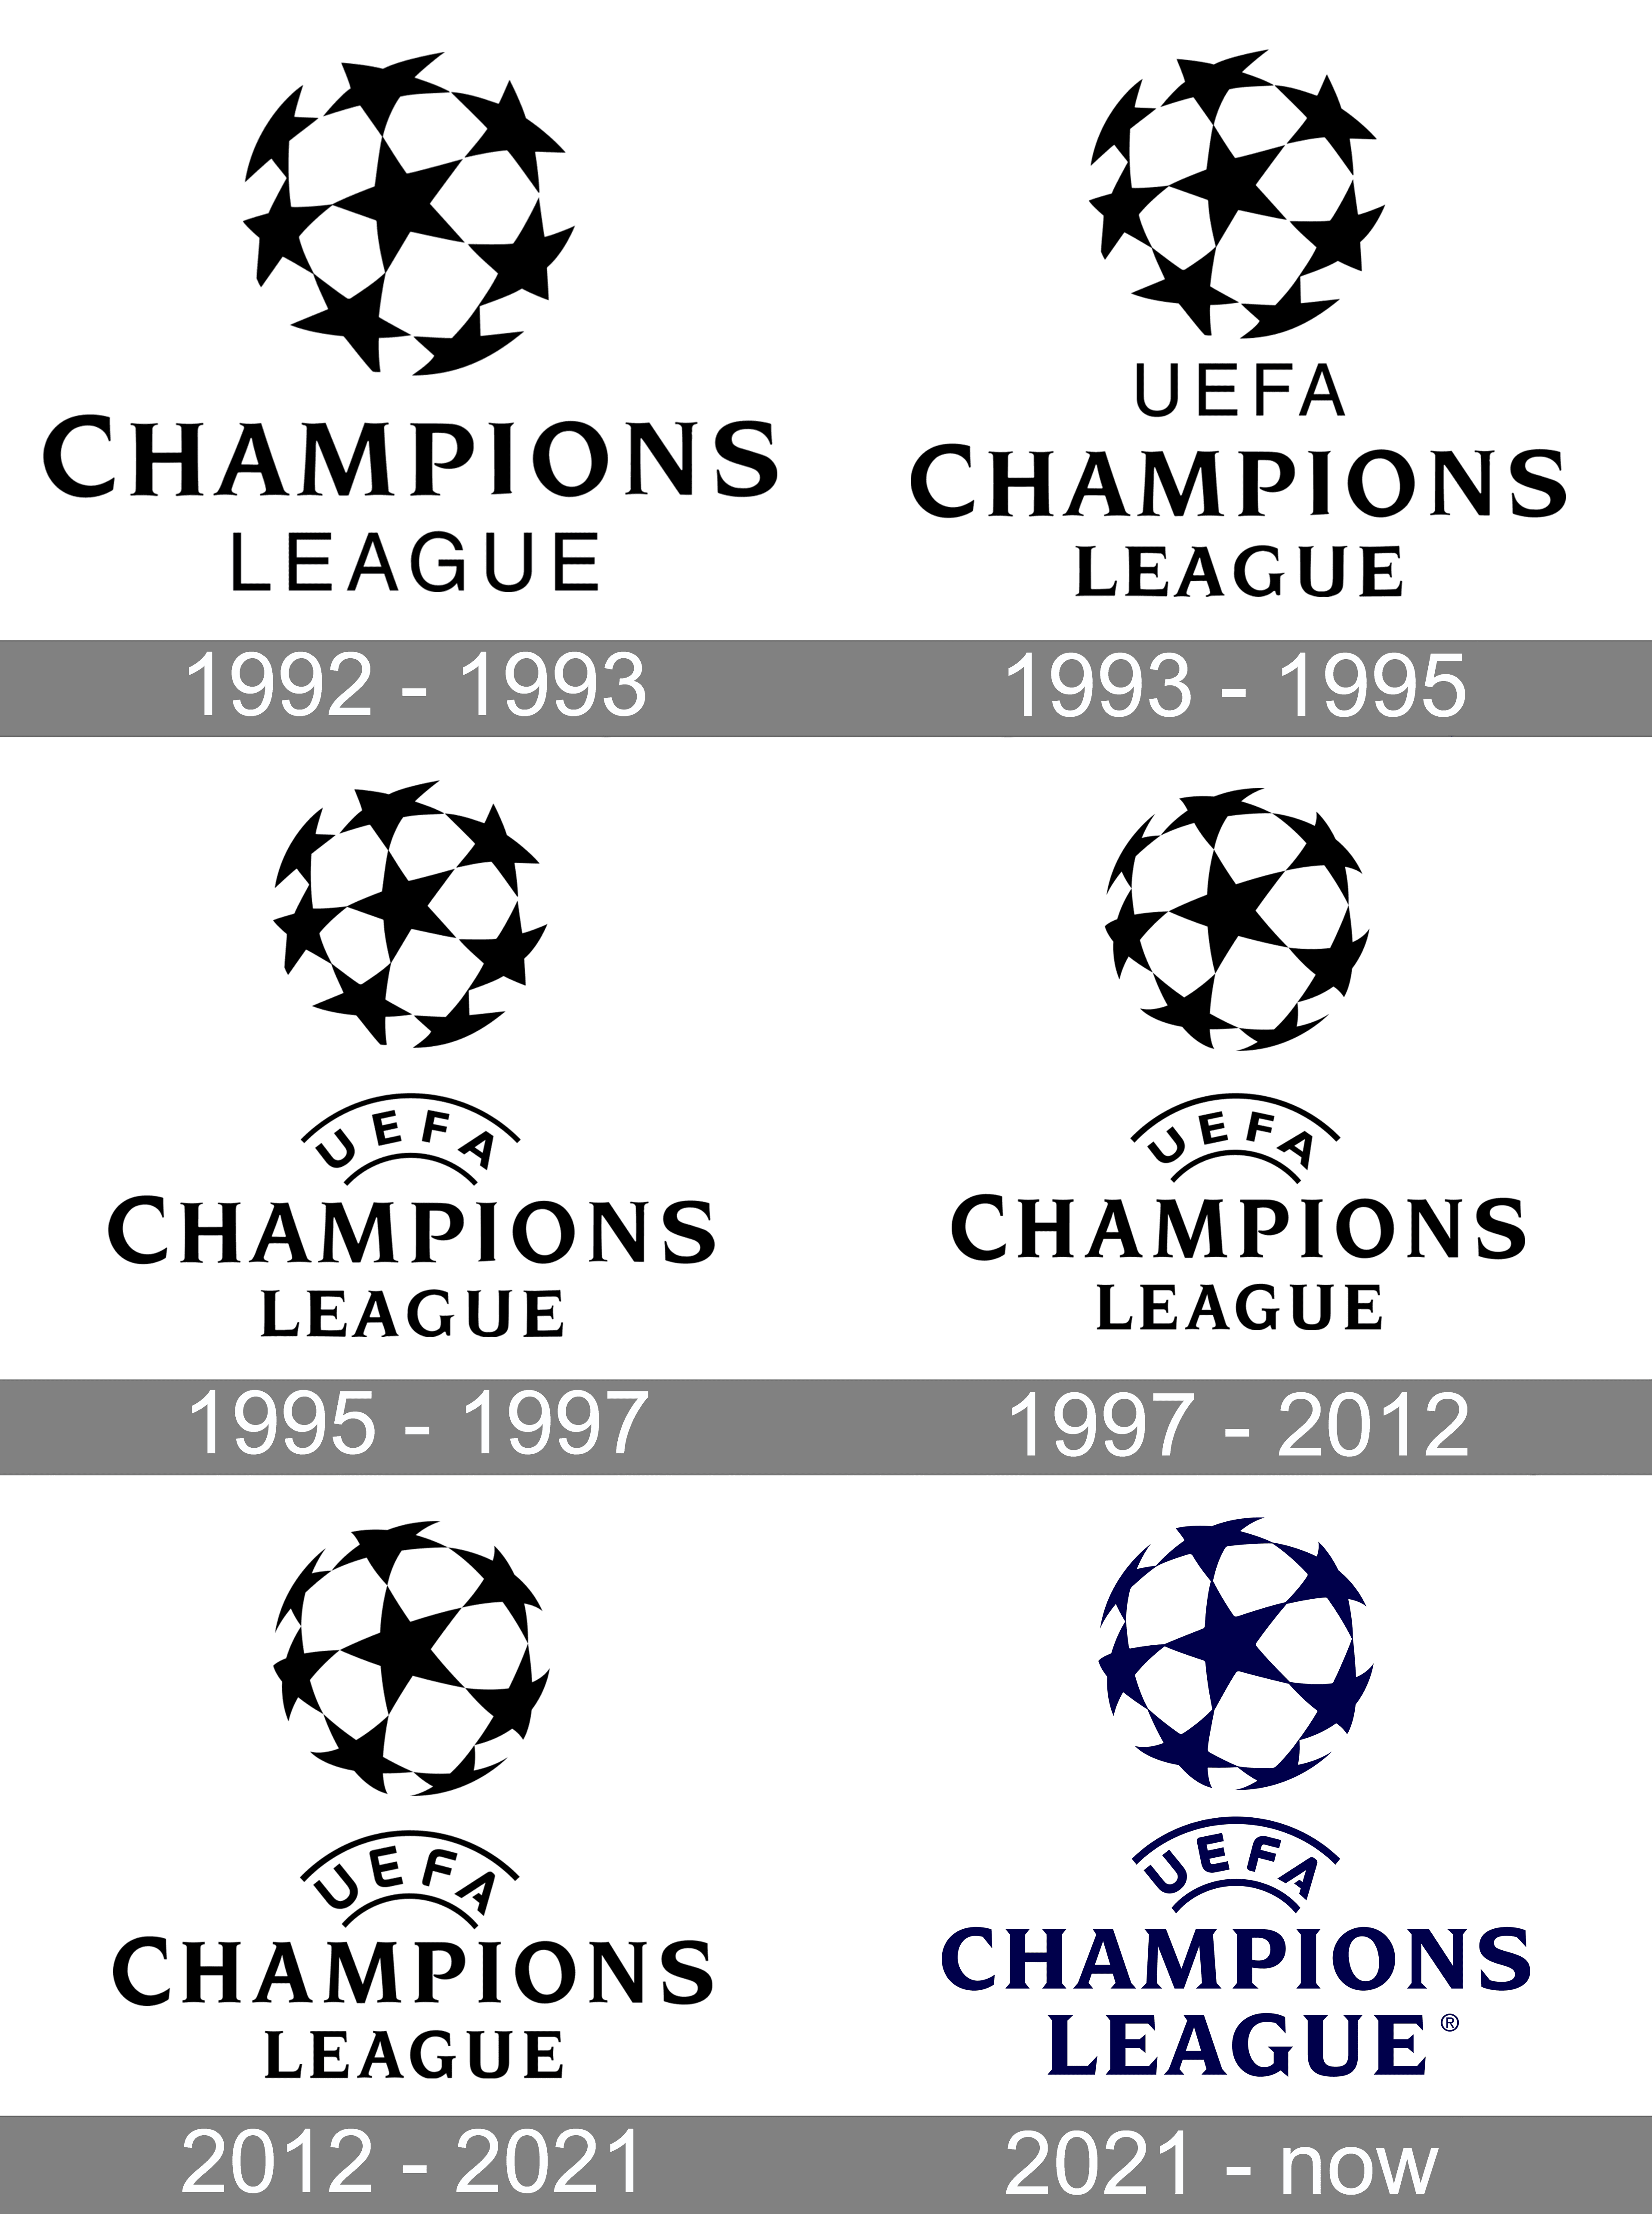 The evolution of the Champions League logo